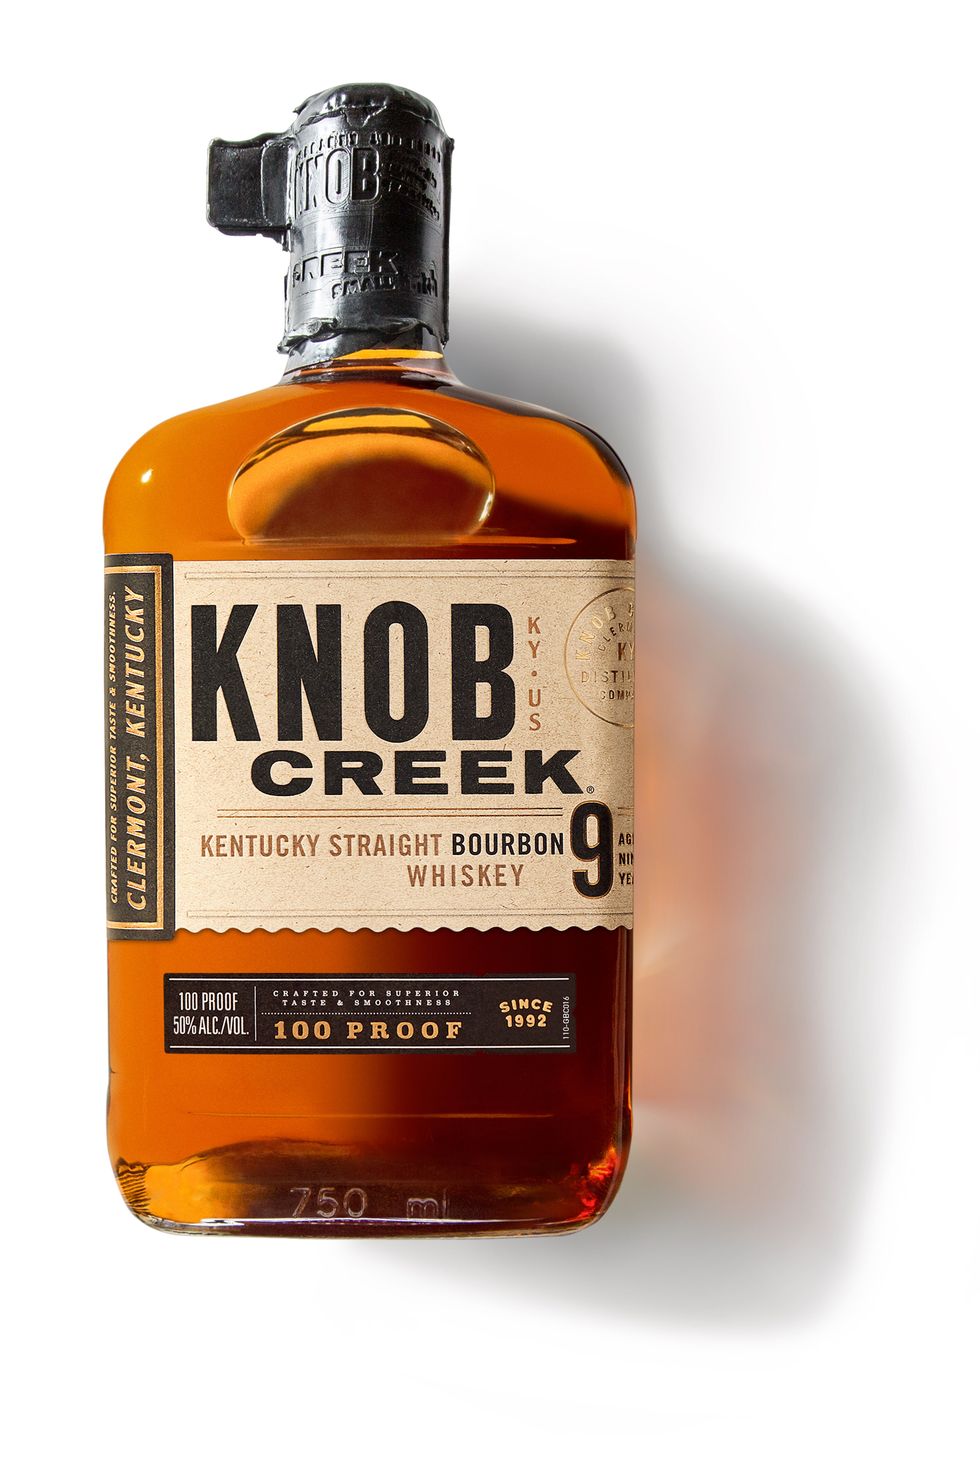 Kentucky Coffee Debuts As A New Coffee-Flavored Whiskey - The